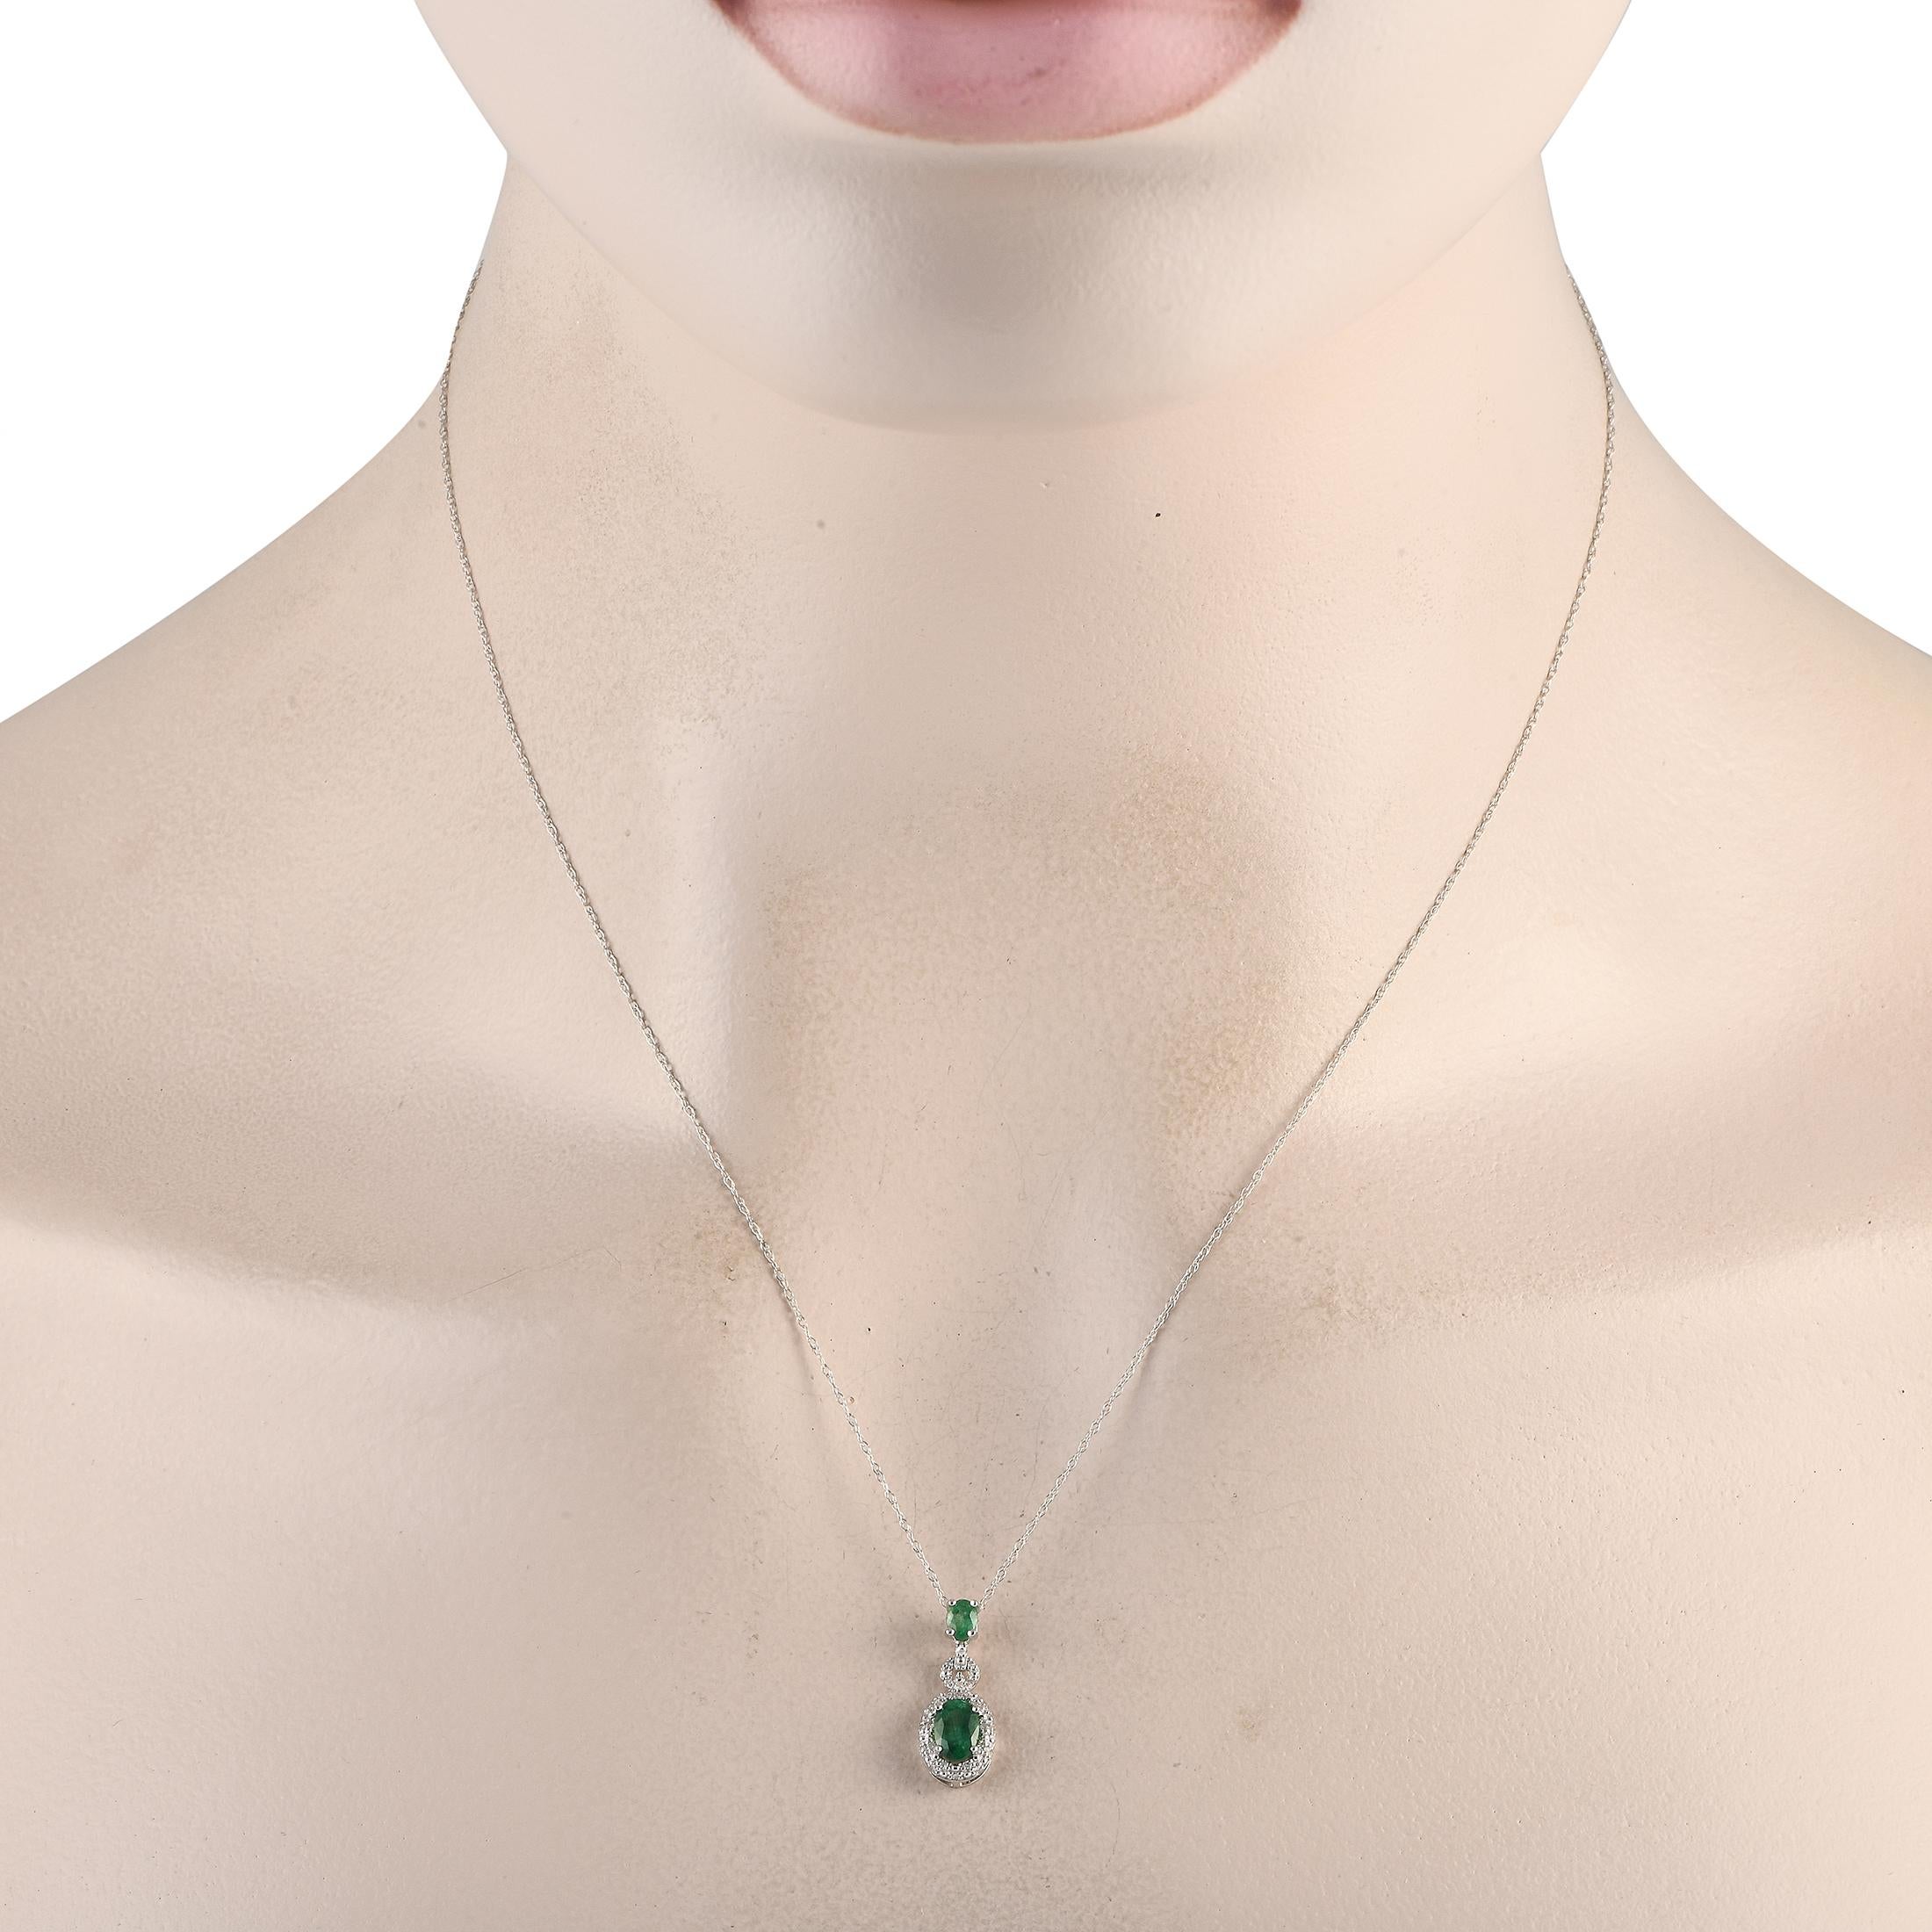 Refresh a monochromatic outfit with a necklace shining with the invigorating green hue of emerald. This LB Exclusive piece is crafted in 14K white gold and has an 18 chain. It captivates with its shimmering oval-cut emerald pendant surrounded by a